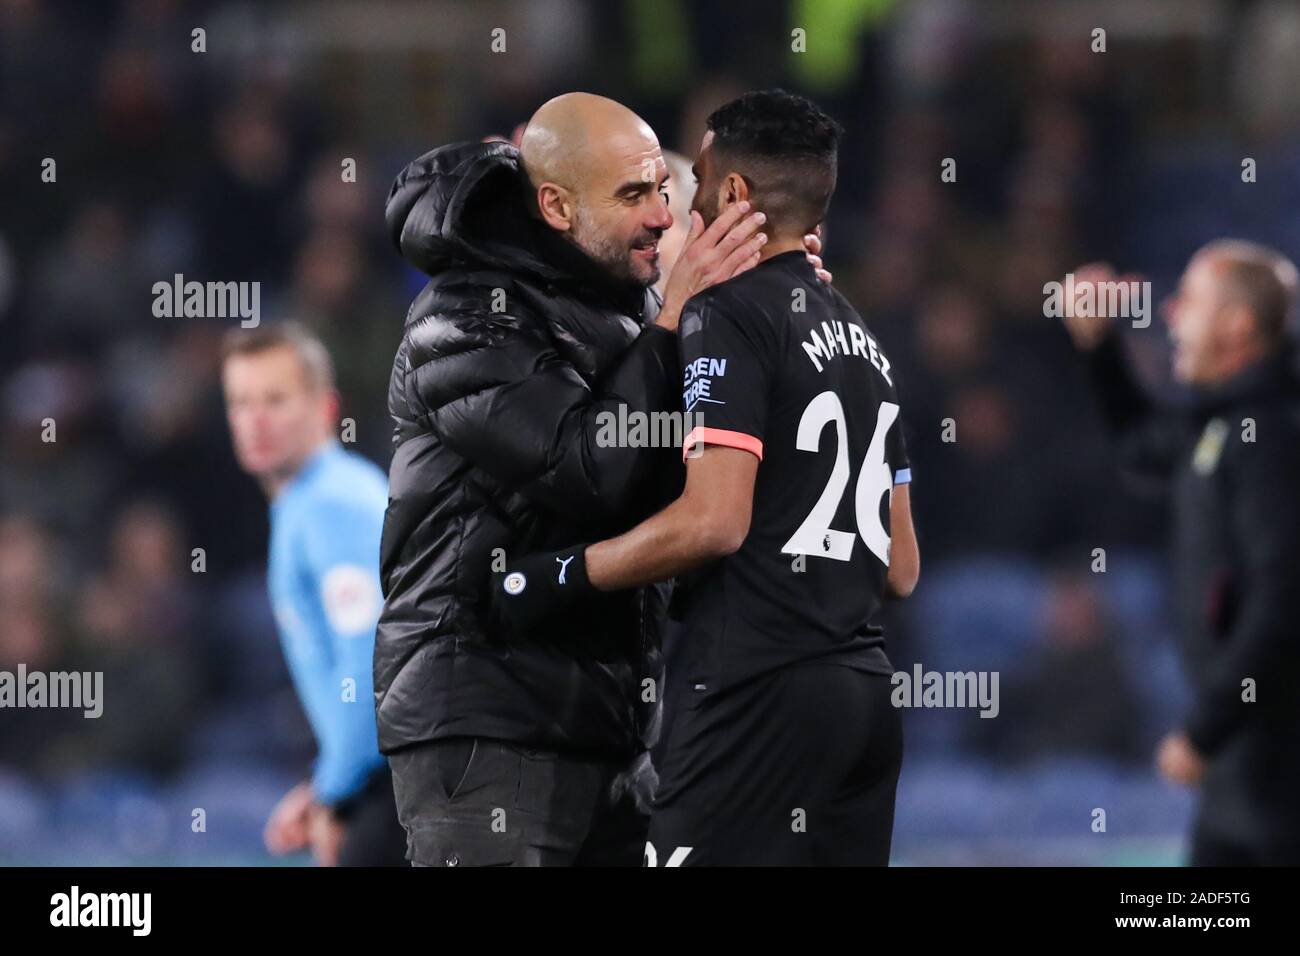 BURNLEY, ENGLAND - DECEMBER 03: Pep Guardiola of Manchester City kisses Riyad Mahrez during the Premier League match between Burnley FC and Manchester City at Turf Moor on December 3, 2019 in Burnley, United Kingdom. (Photo by MB Media) Stock Photo